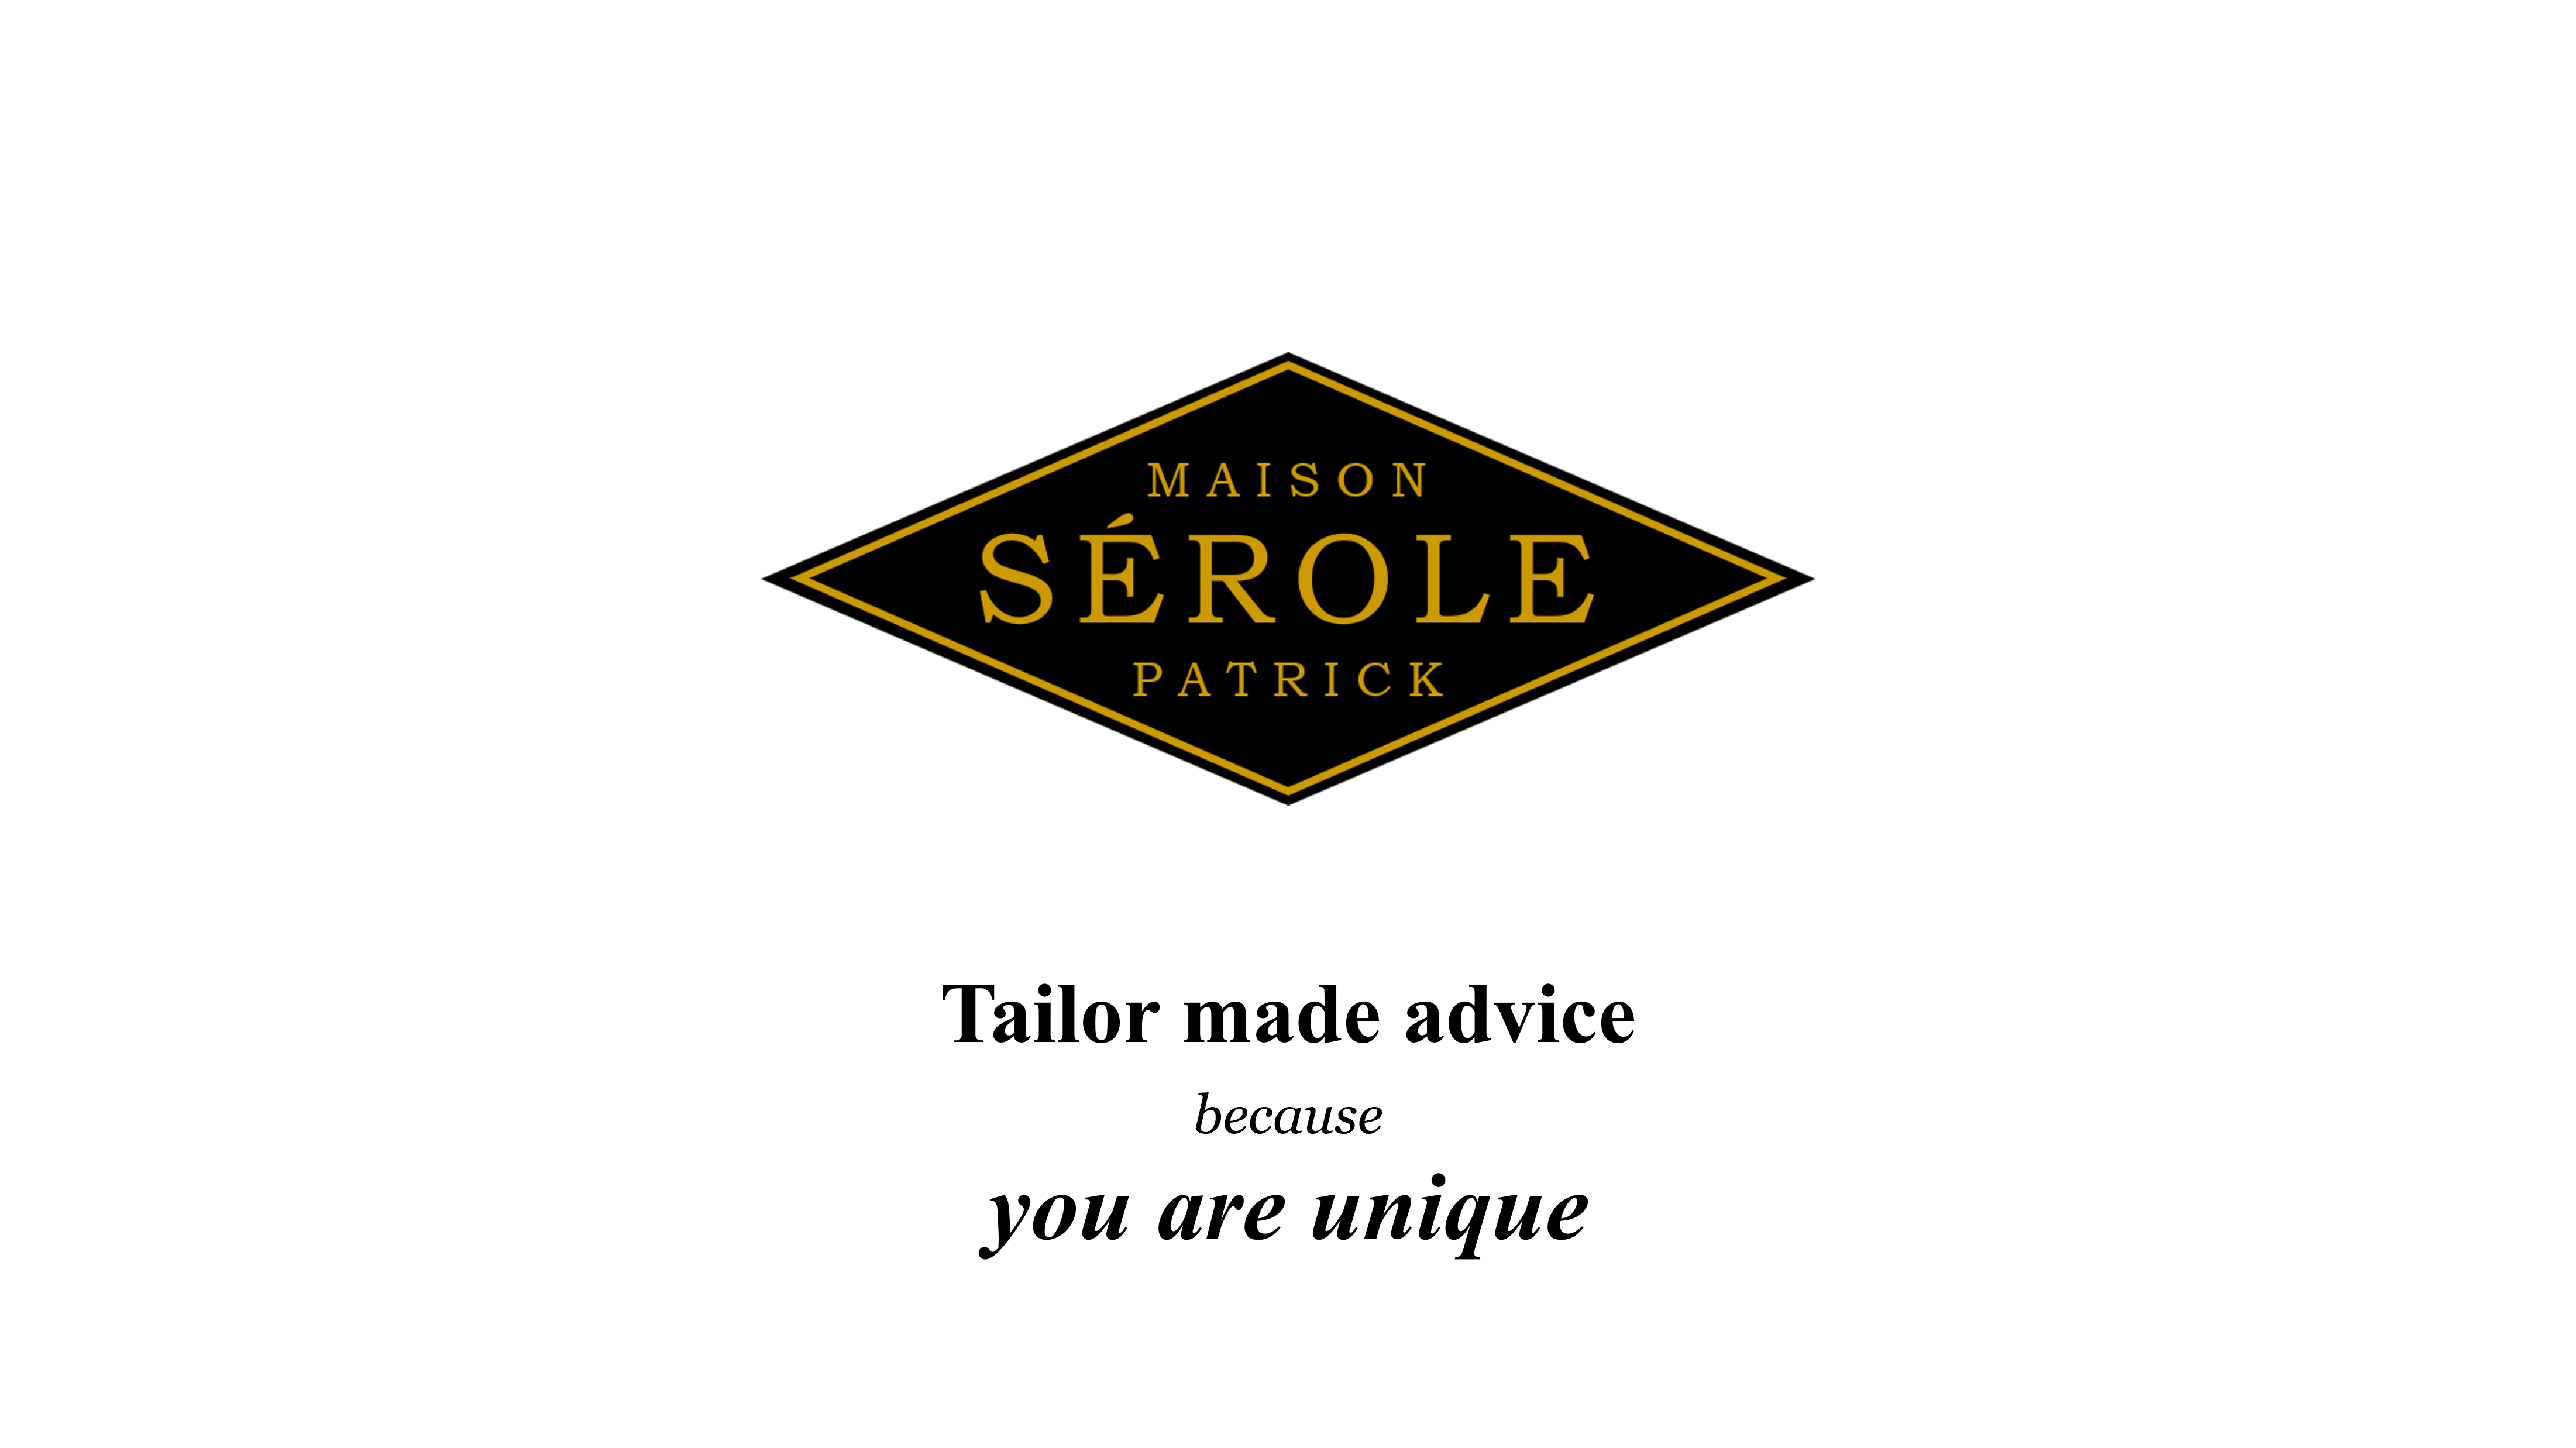 Welcome to the Maison Patrick Sérole hair salon in Roanne